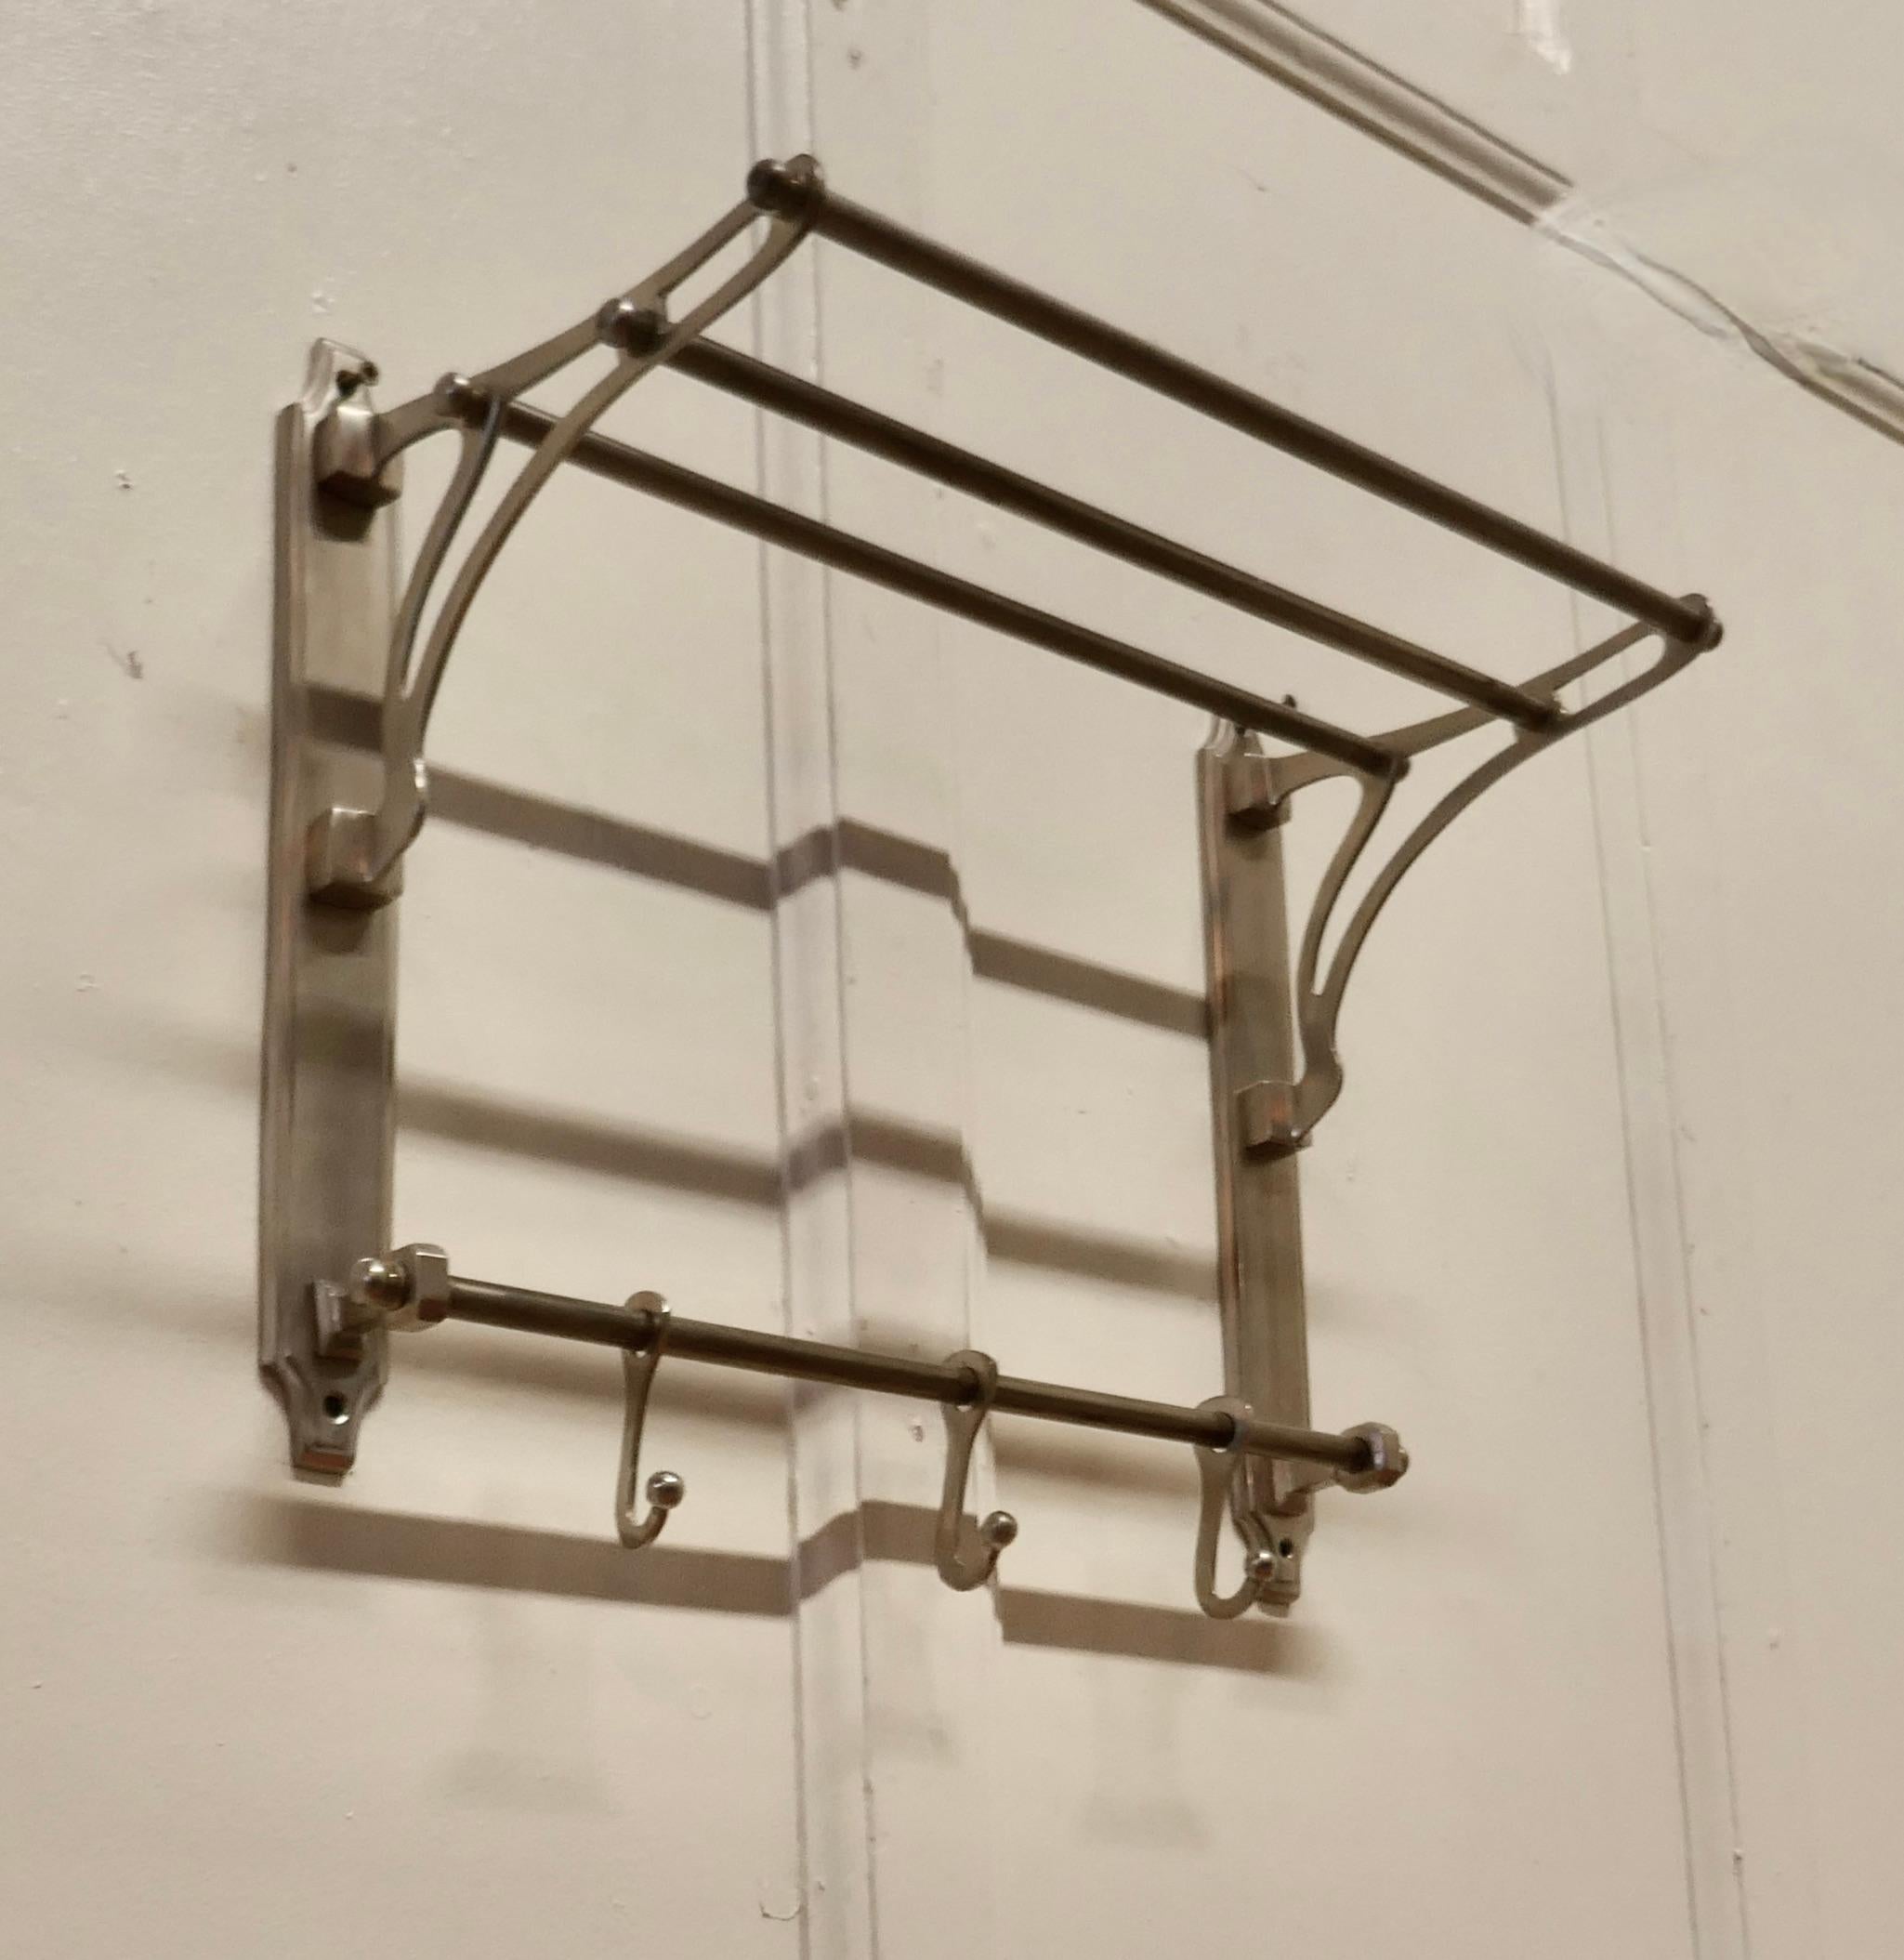 Small French Art Deco hat and coat rack, pullman railway train style

 This Art Deco style hat and coat rack has 3 sliding hooks and an upper railed shelf 
Racks like these were used on French railway trains just like the ones on “the Orient